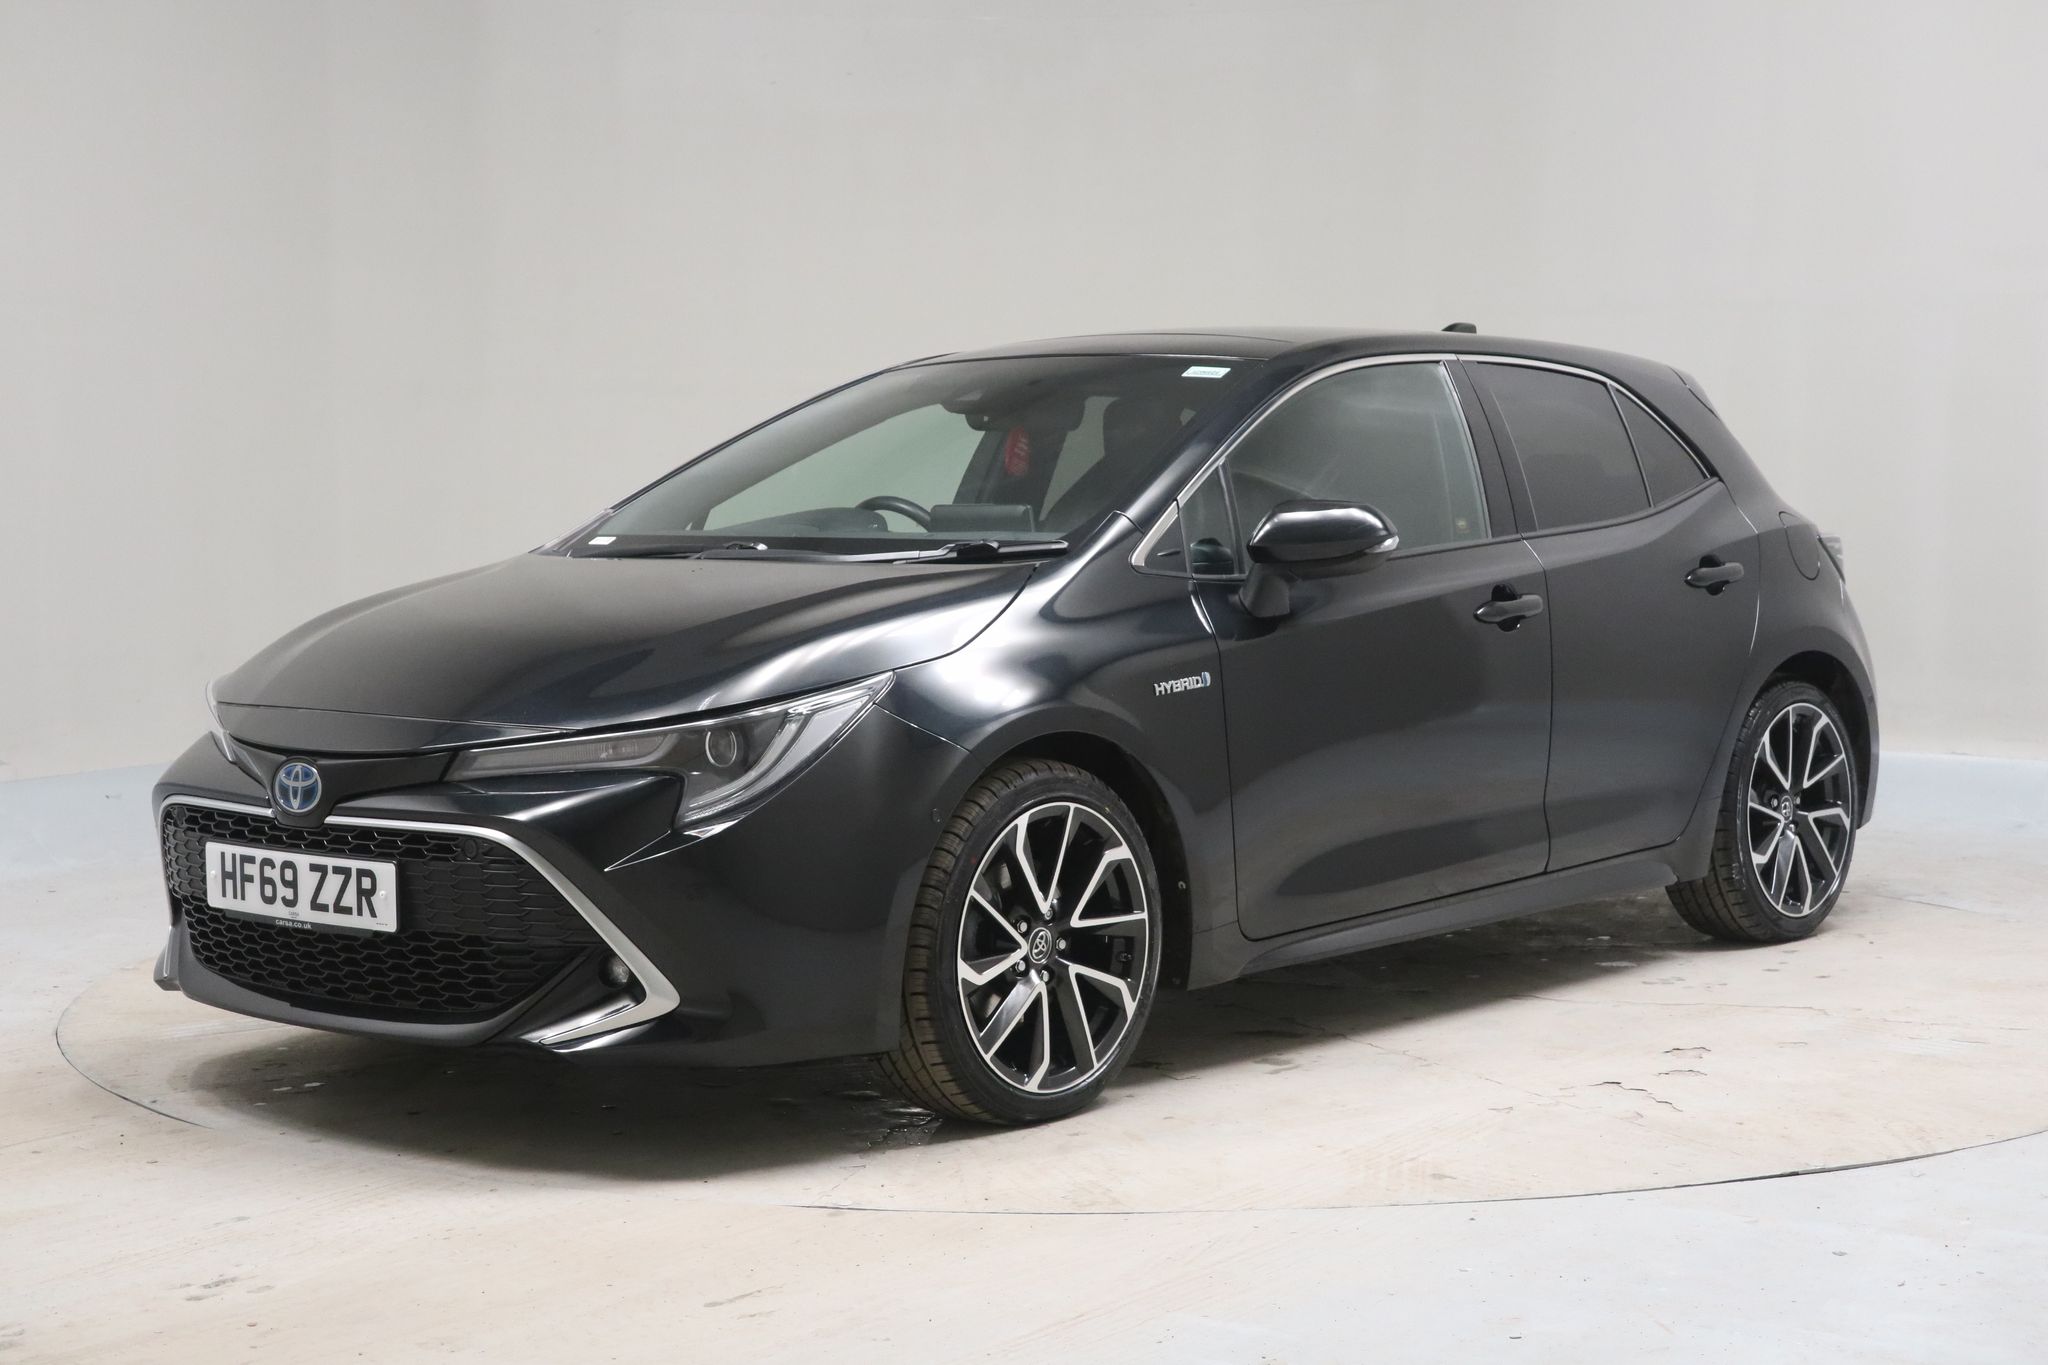 2019 used Toyota Corolla 2.0 VVT-h Excel CVT (184 ps)